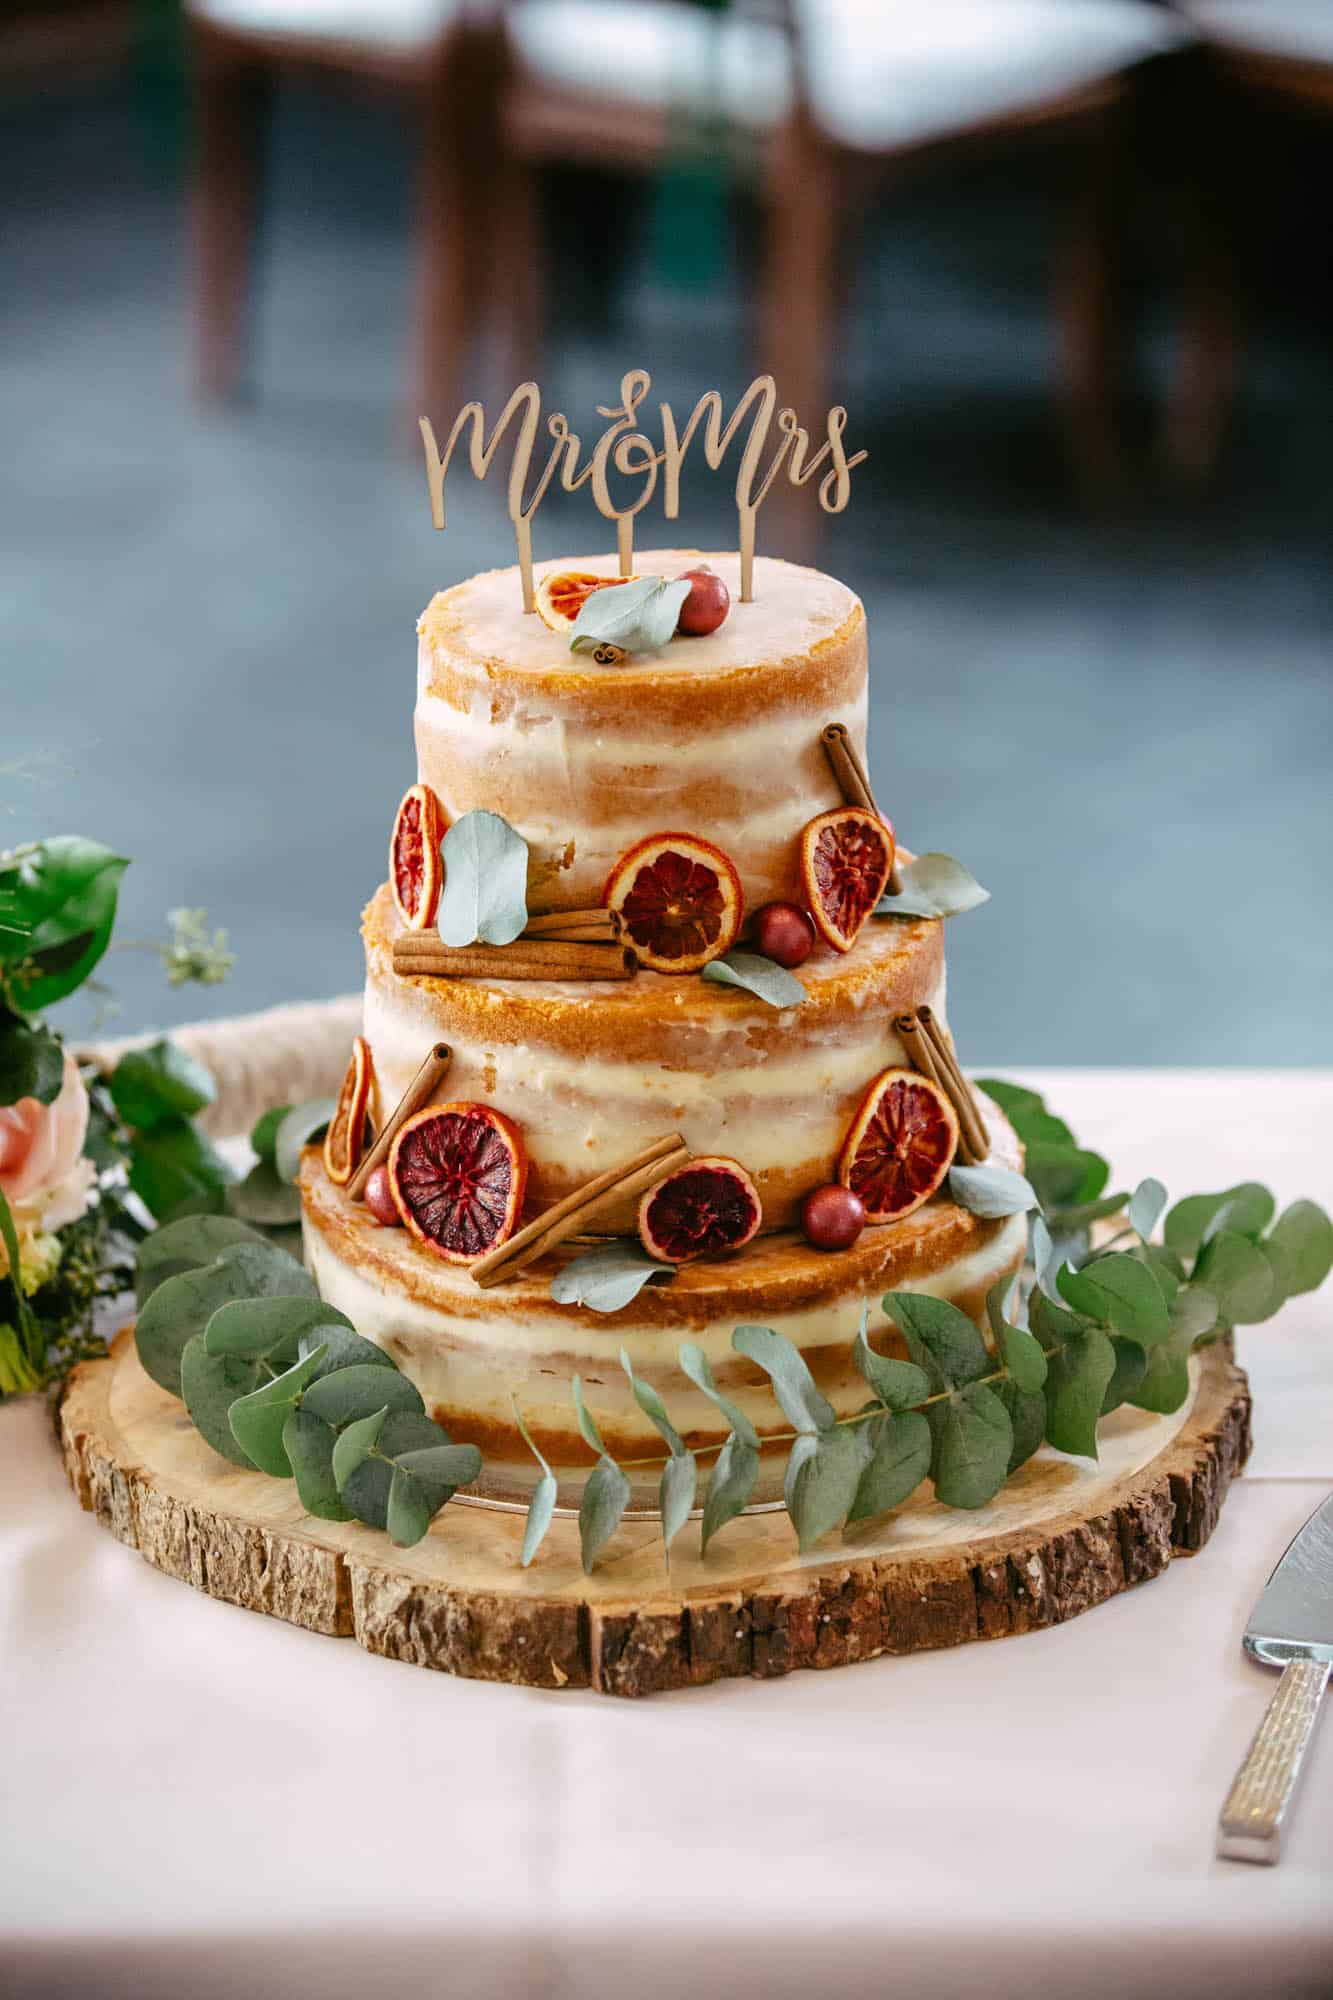 A three-tier wedding cake with a wooden Mr. and Mrs. cake topper.